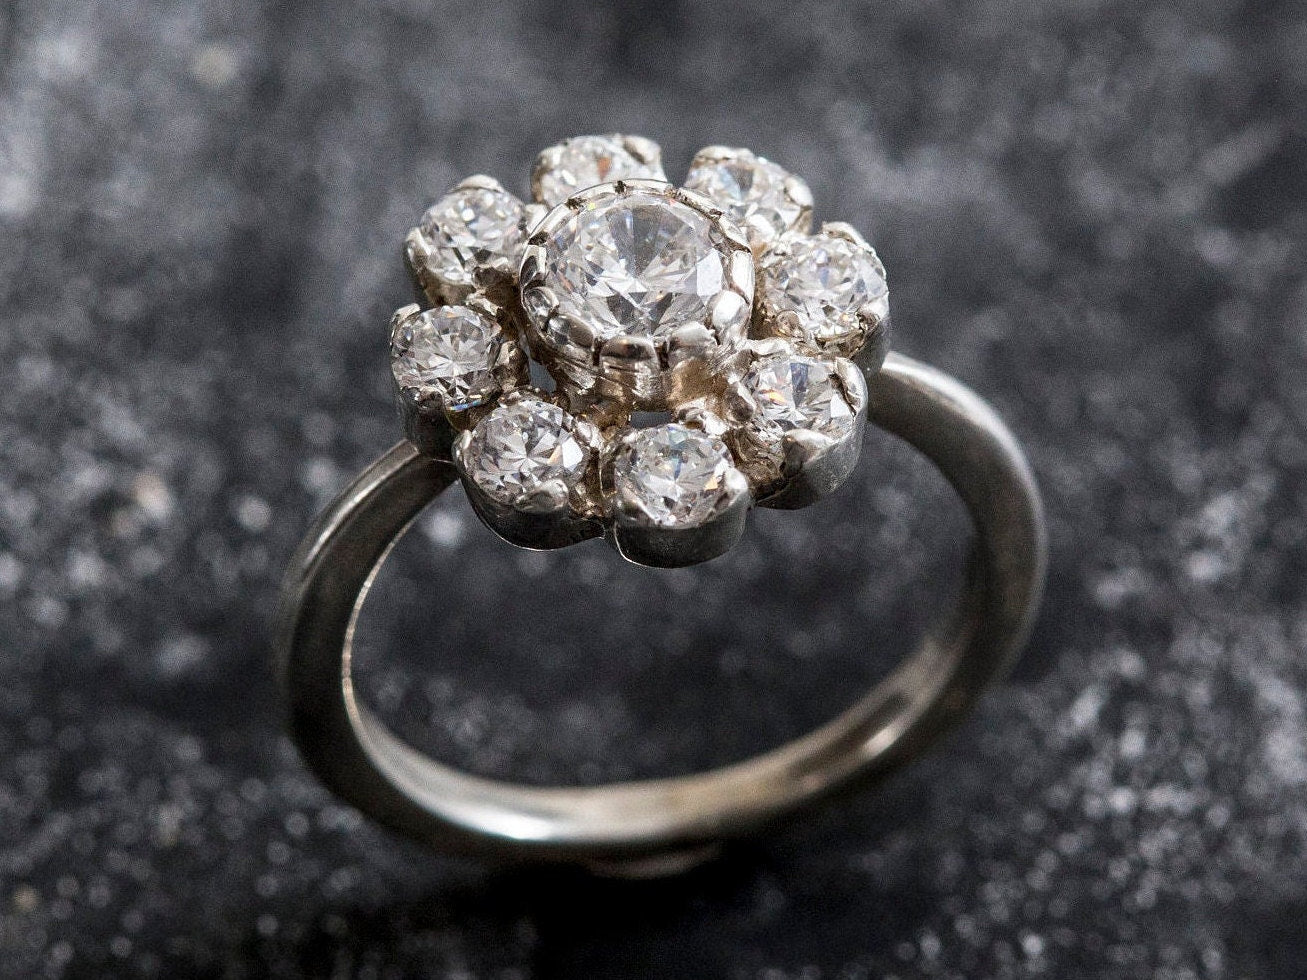 Sparkly Flower Diamond Ring in Vintage Style